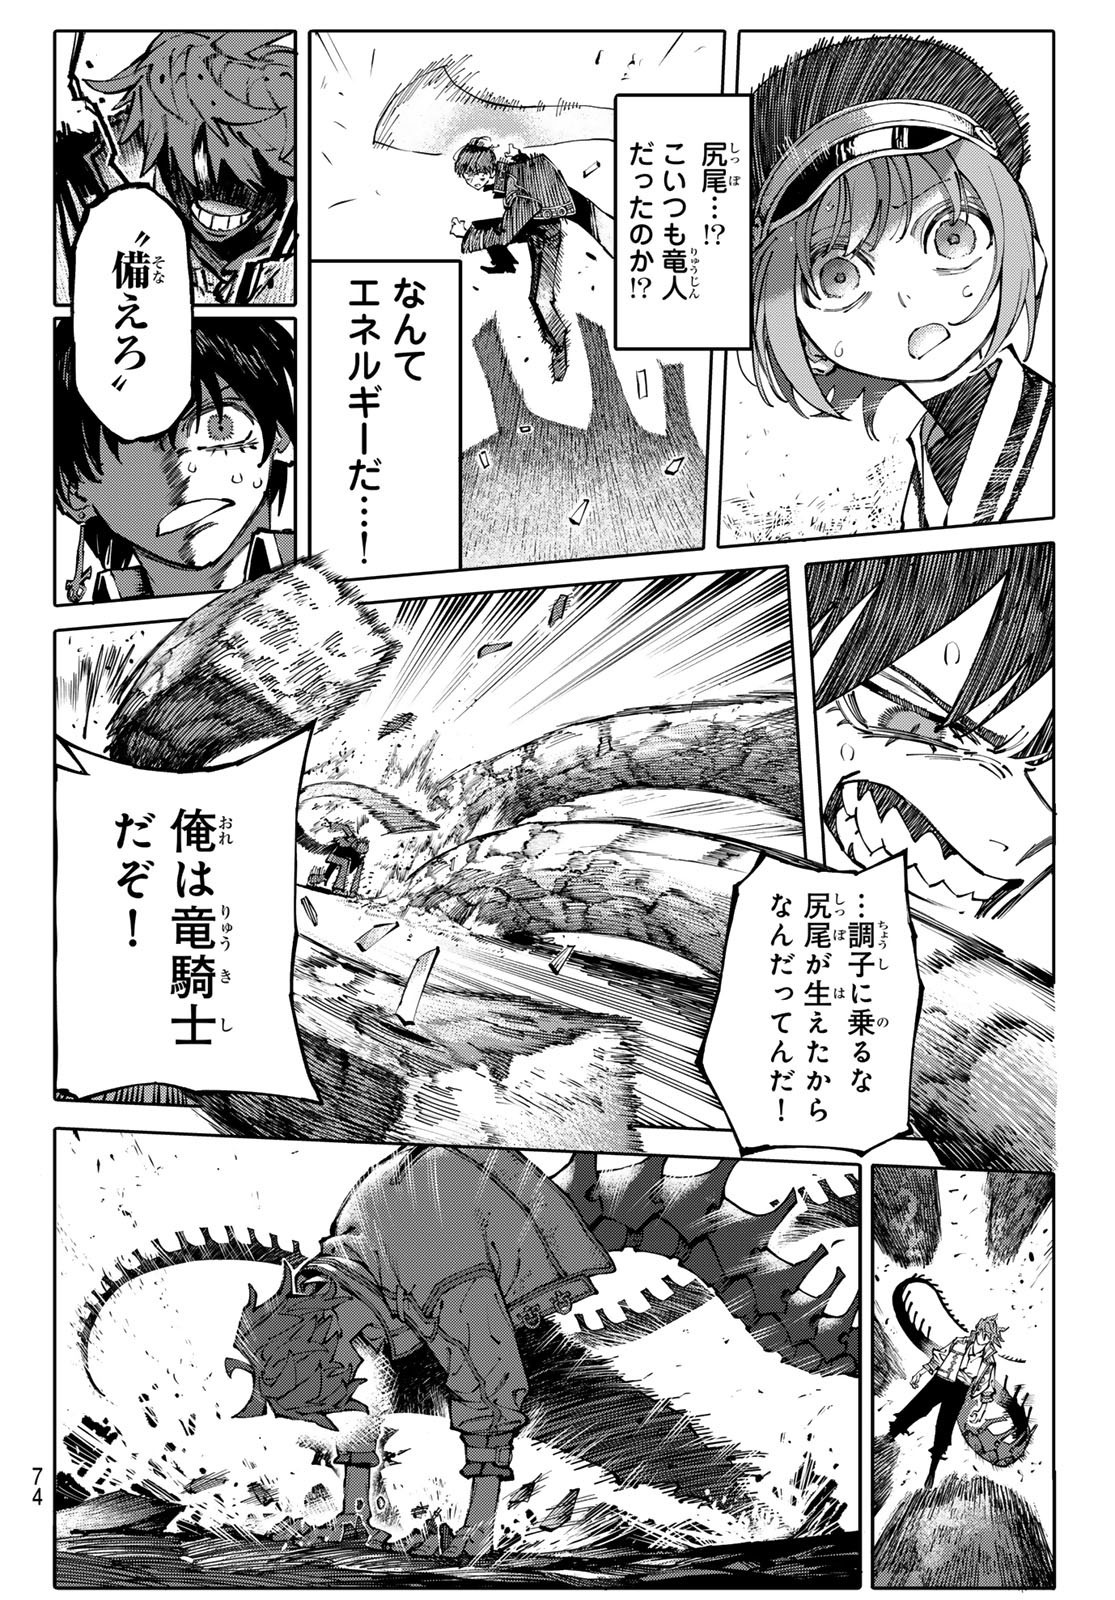 Weekly Shōnen Magazine - 週刊少年マガジン - Chapter 2024-33 - Page 72